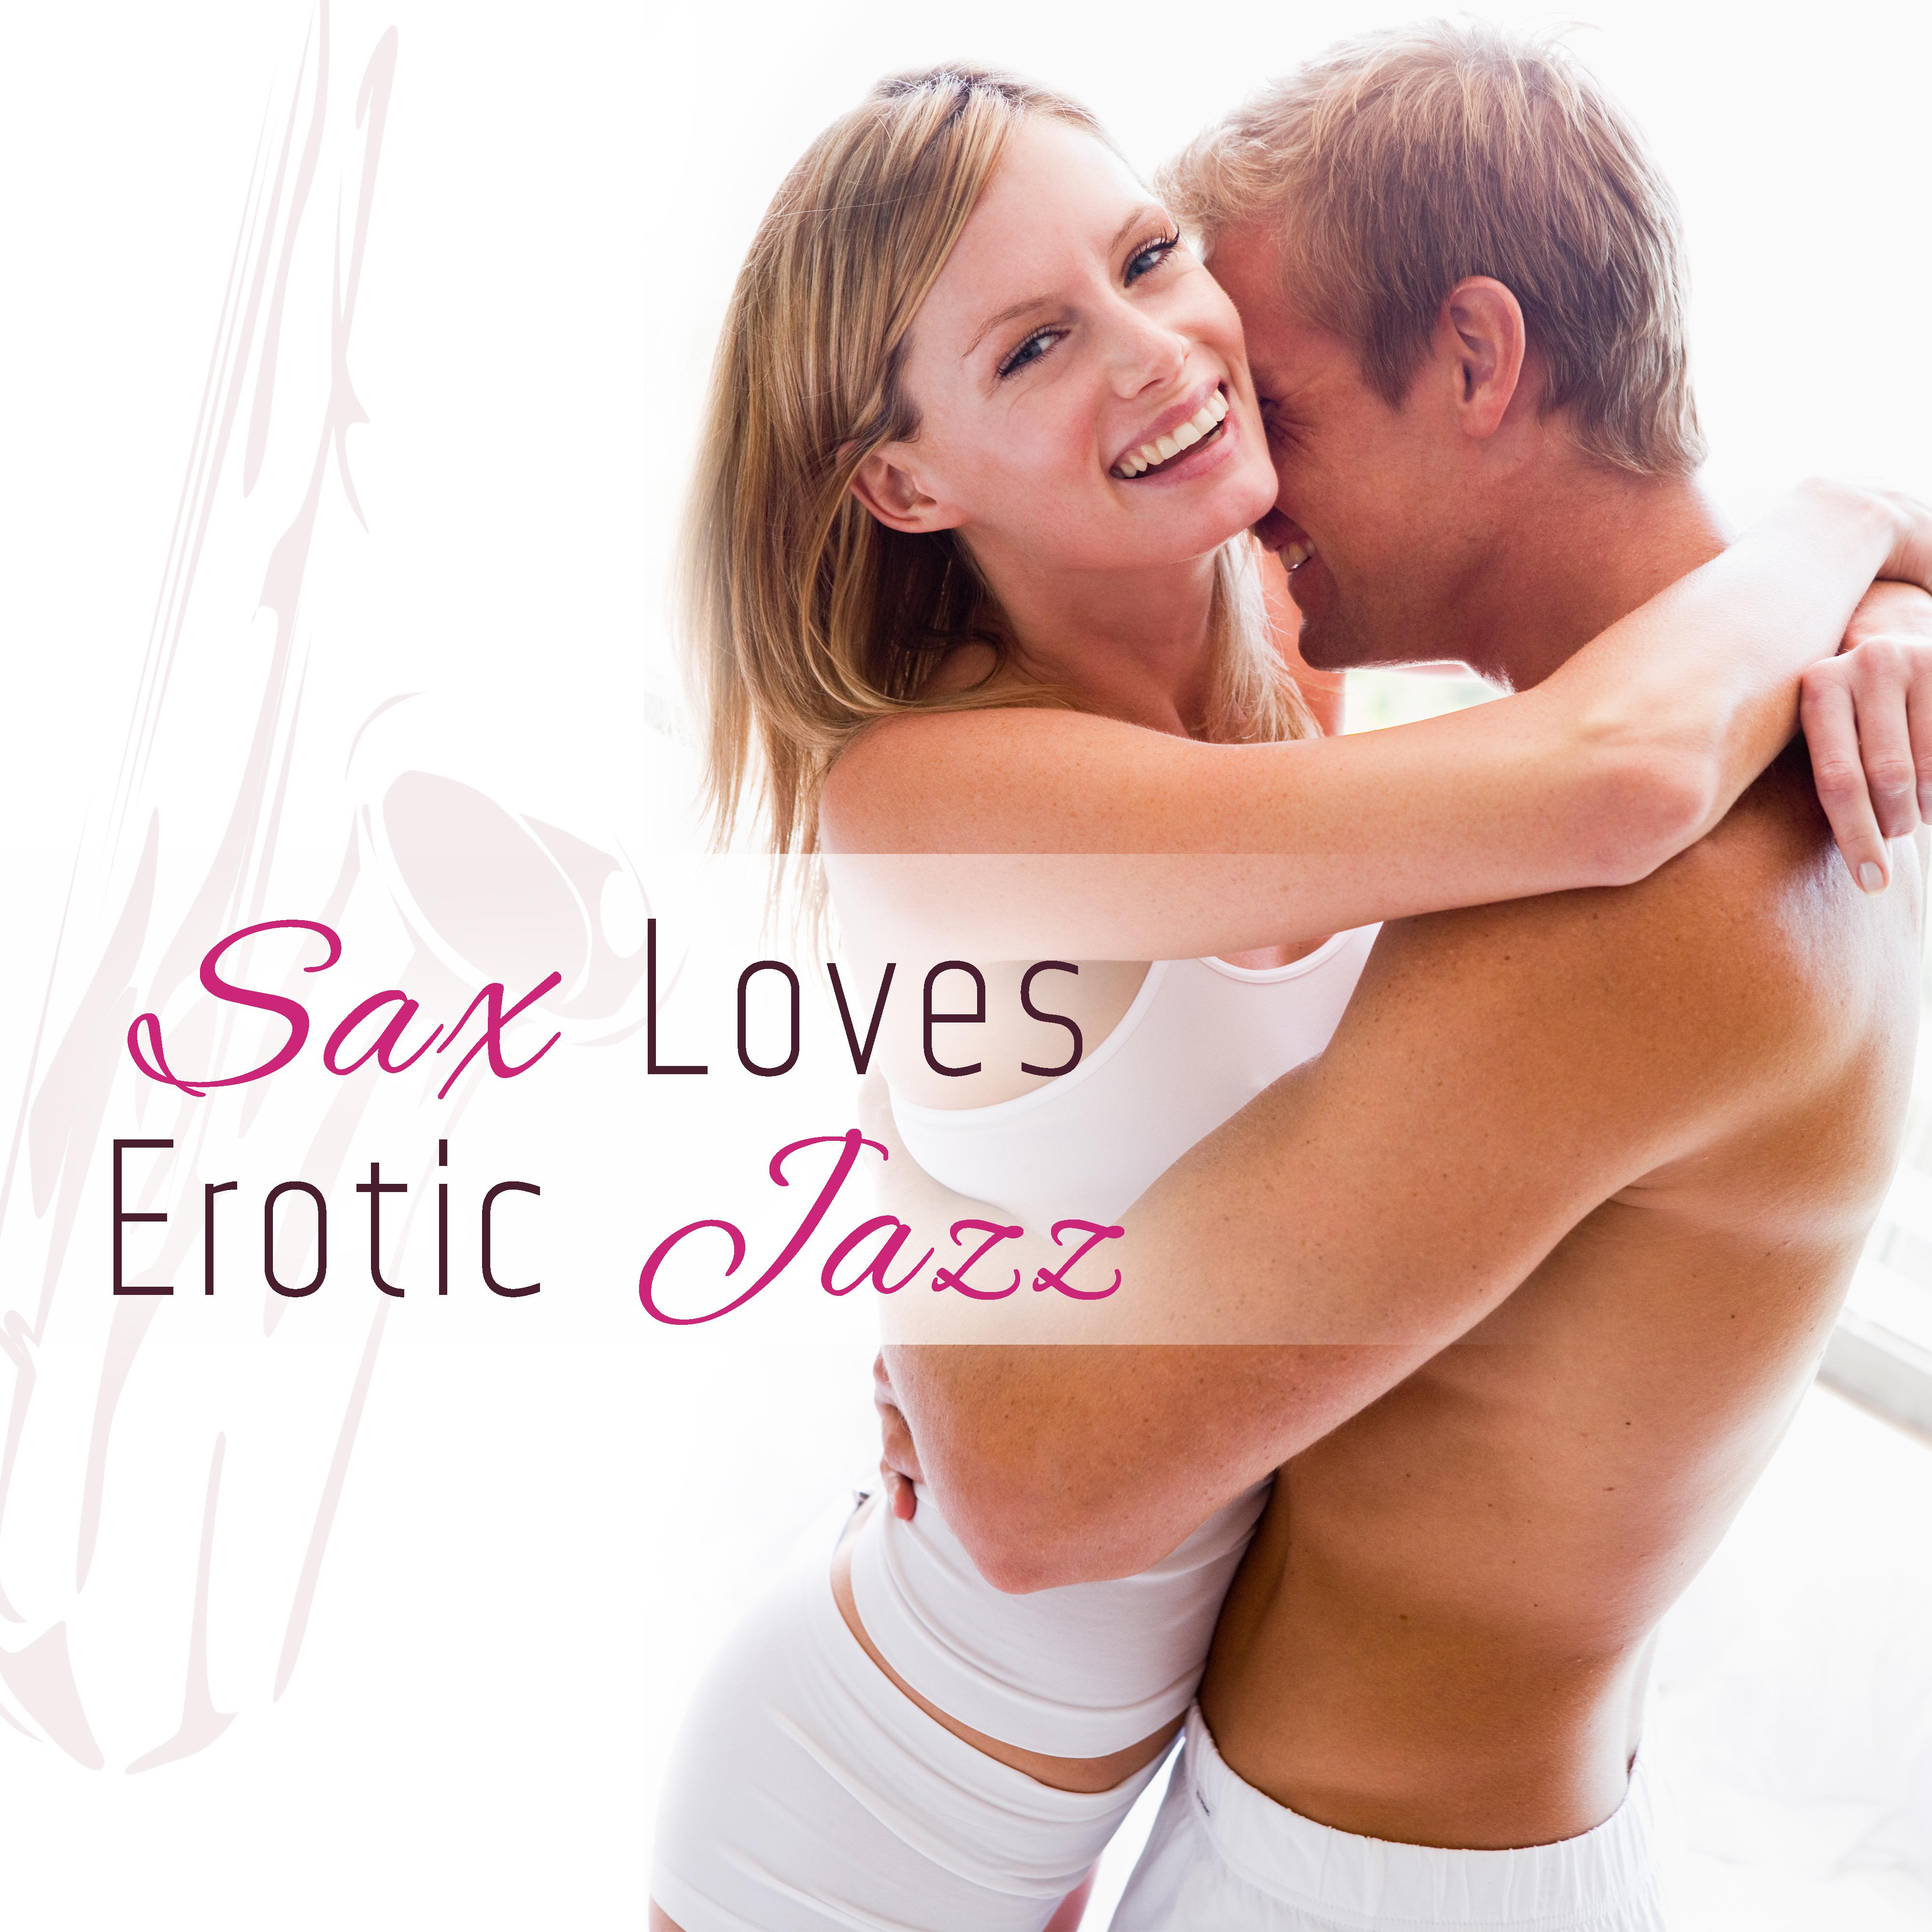 Sax Loves Erotic Jazz  Sensual Music for Lovers, Pure Desires, Erotic Games for Two, Smooth Jazz for Making Love